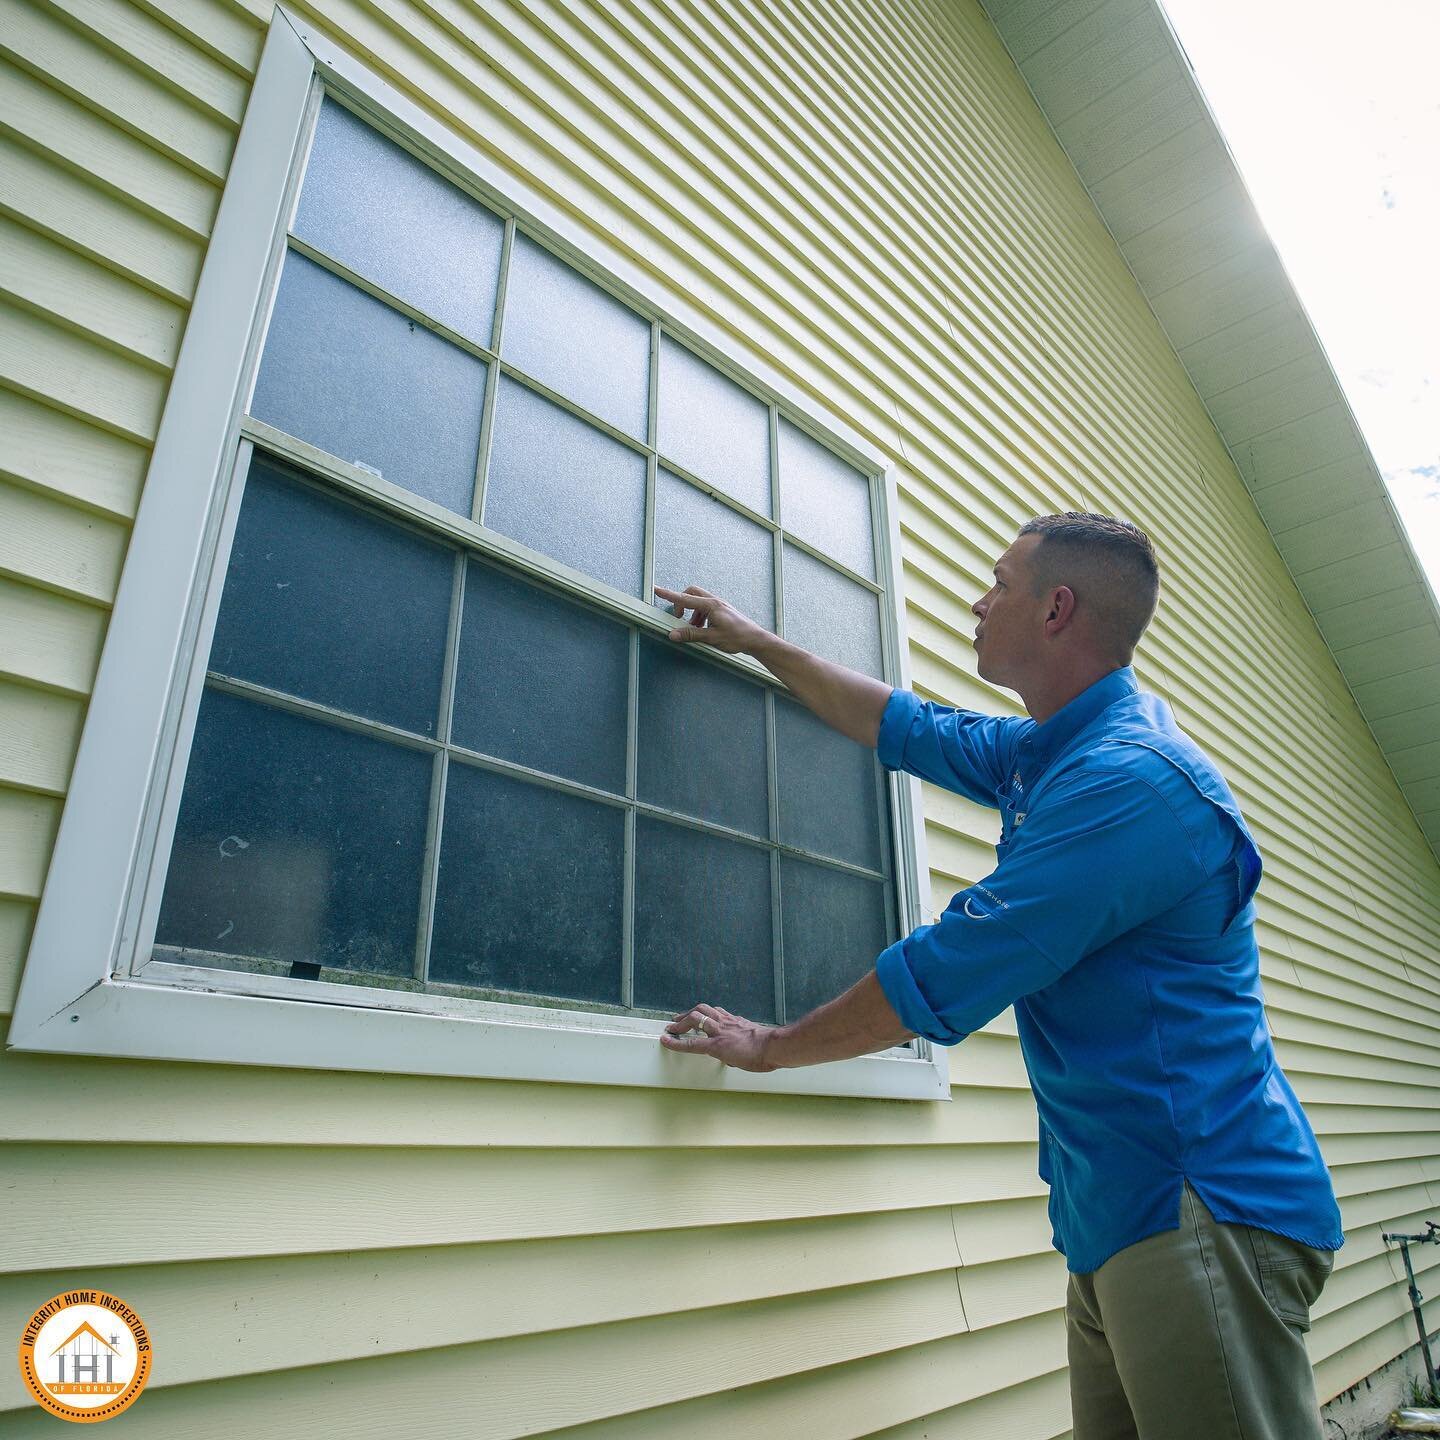 Q: Can I Perform My Own Inspection?⠀
⠀
A: Although you may think performing your own inspection will save you money, it isn&rsquo;t a wise idea for the long-term value and safety of your home. Our licensed inspectors at Integrity Home Inspections are